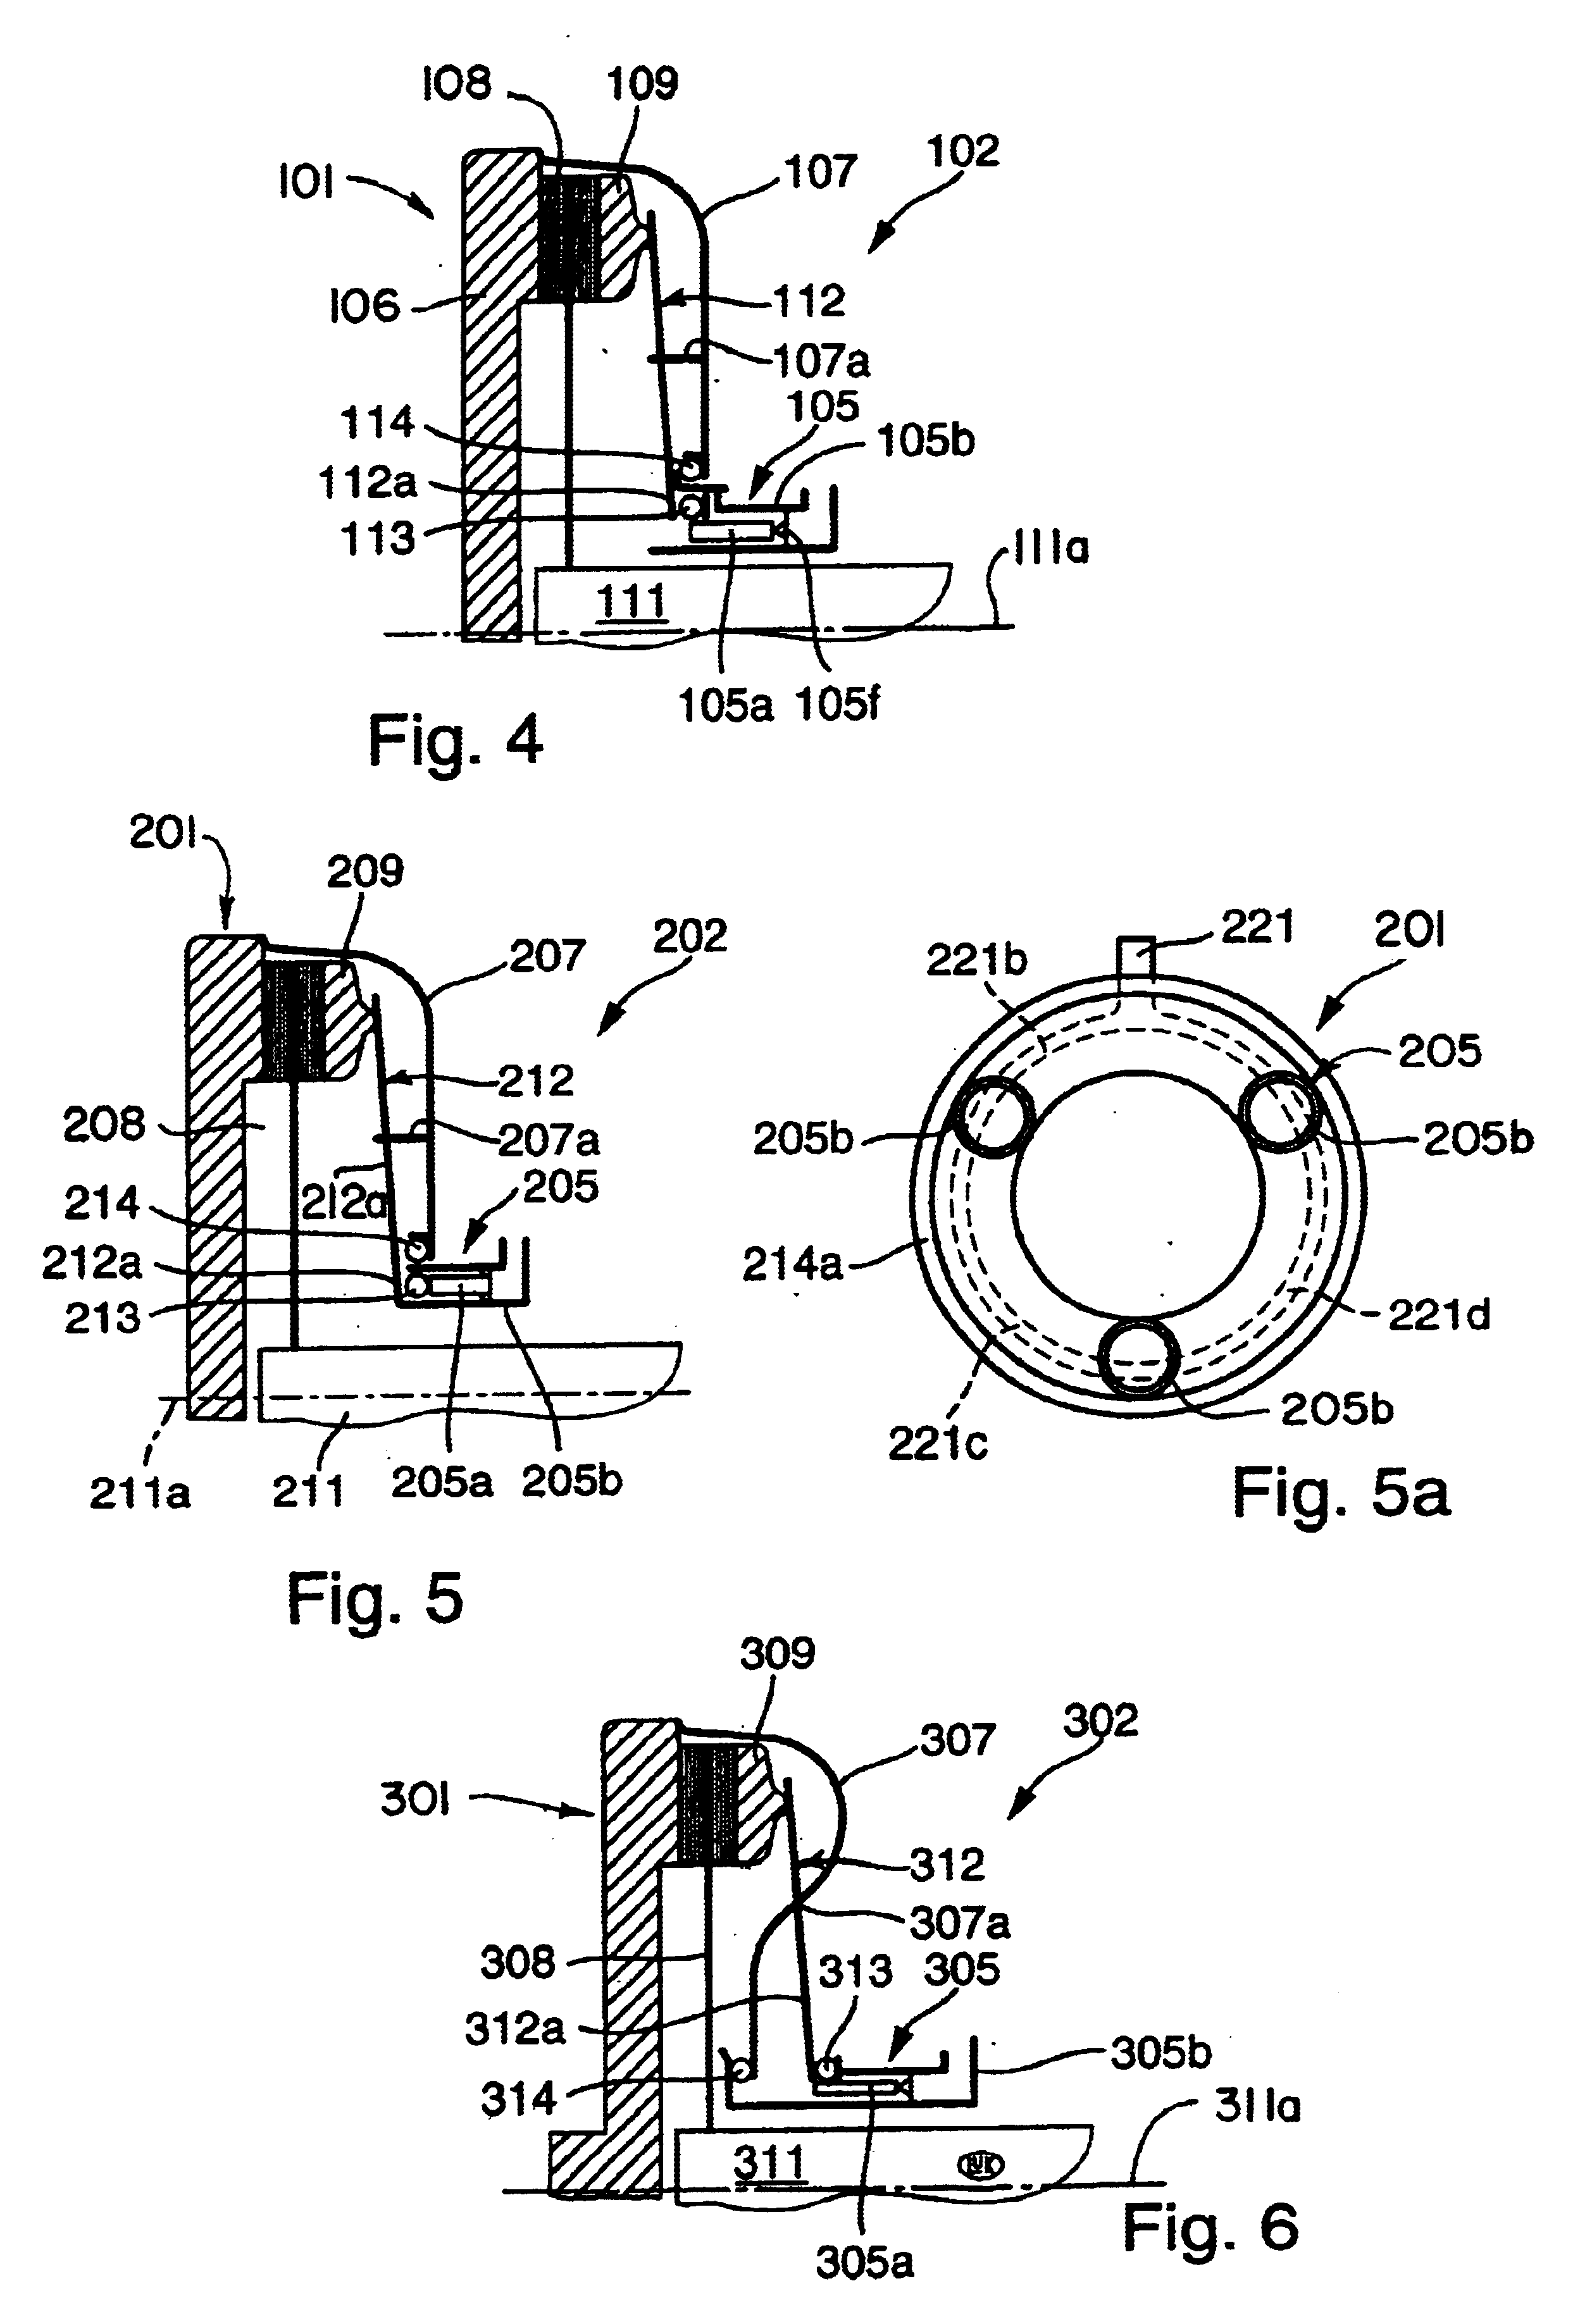 Power train for use in motor vehicles and the like